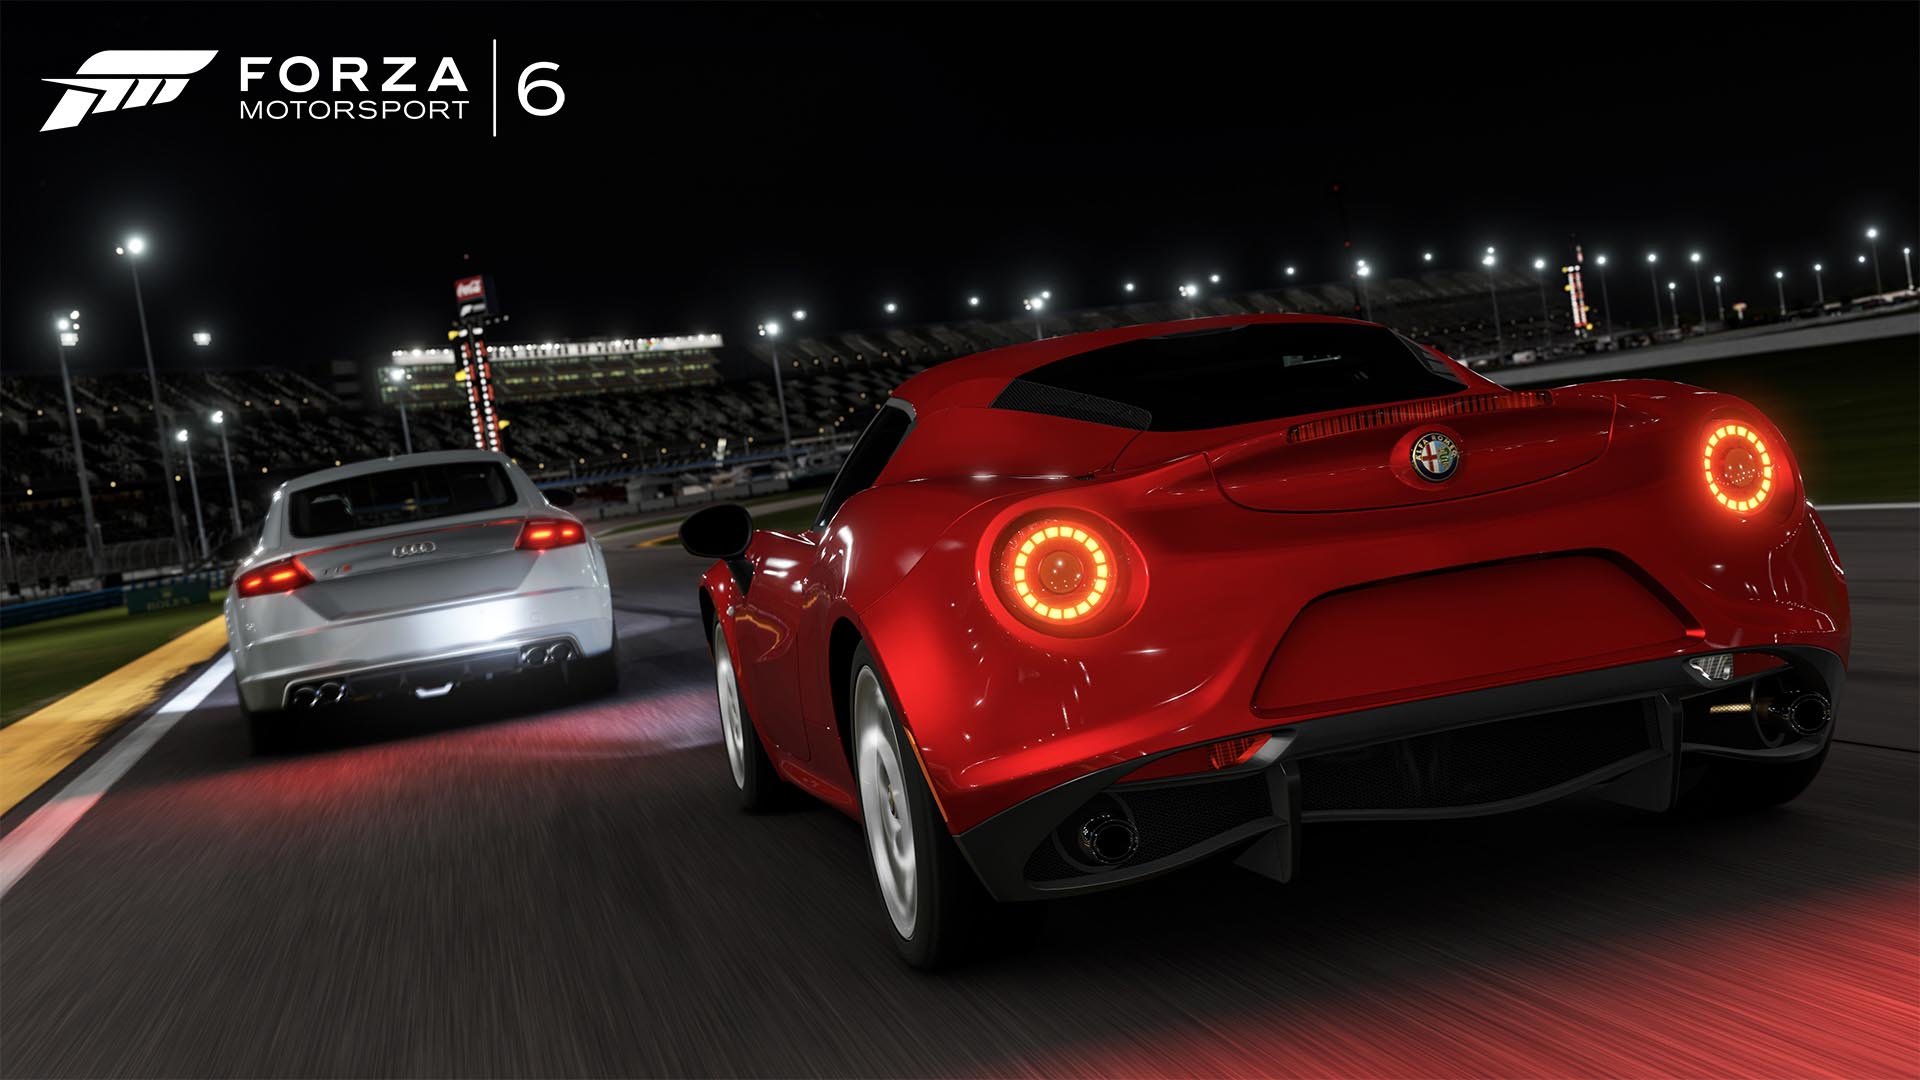 Awesome Forza Motorsport 6 free wallpaper ID:131870 for full hd 1080p computer